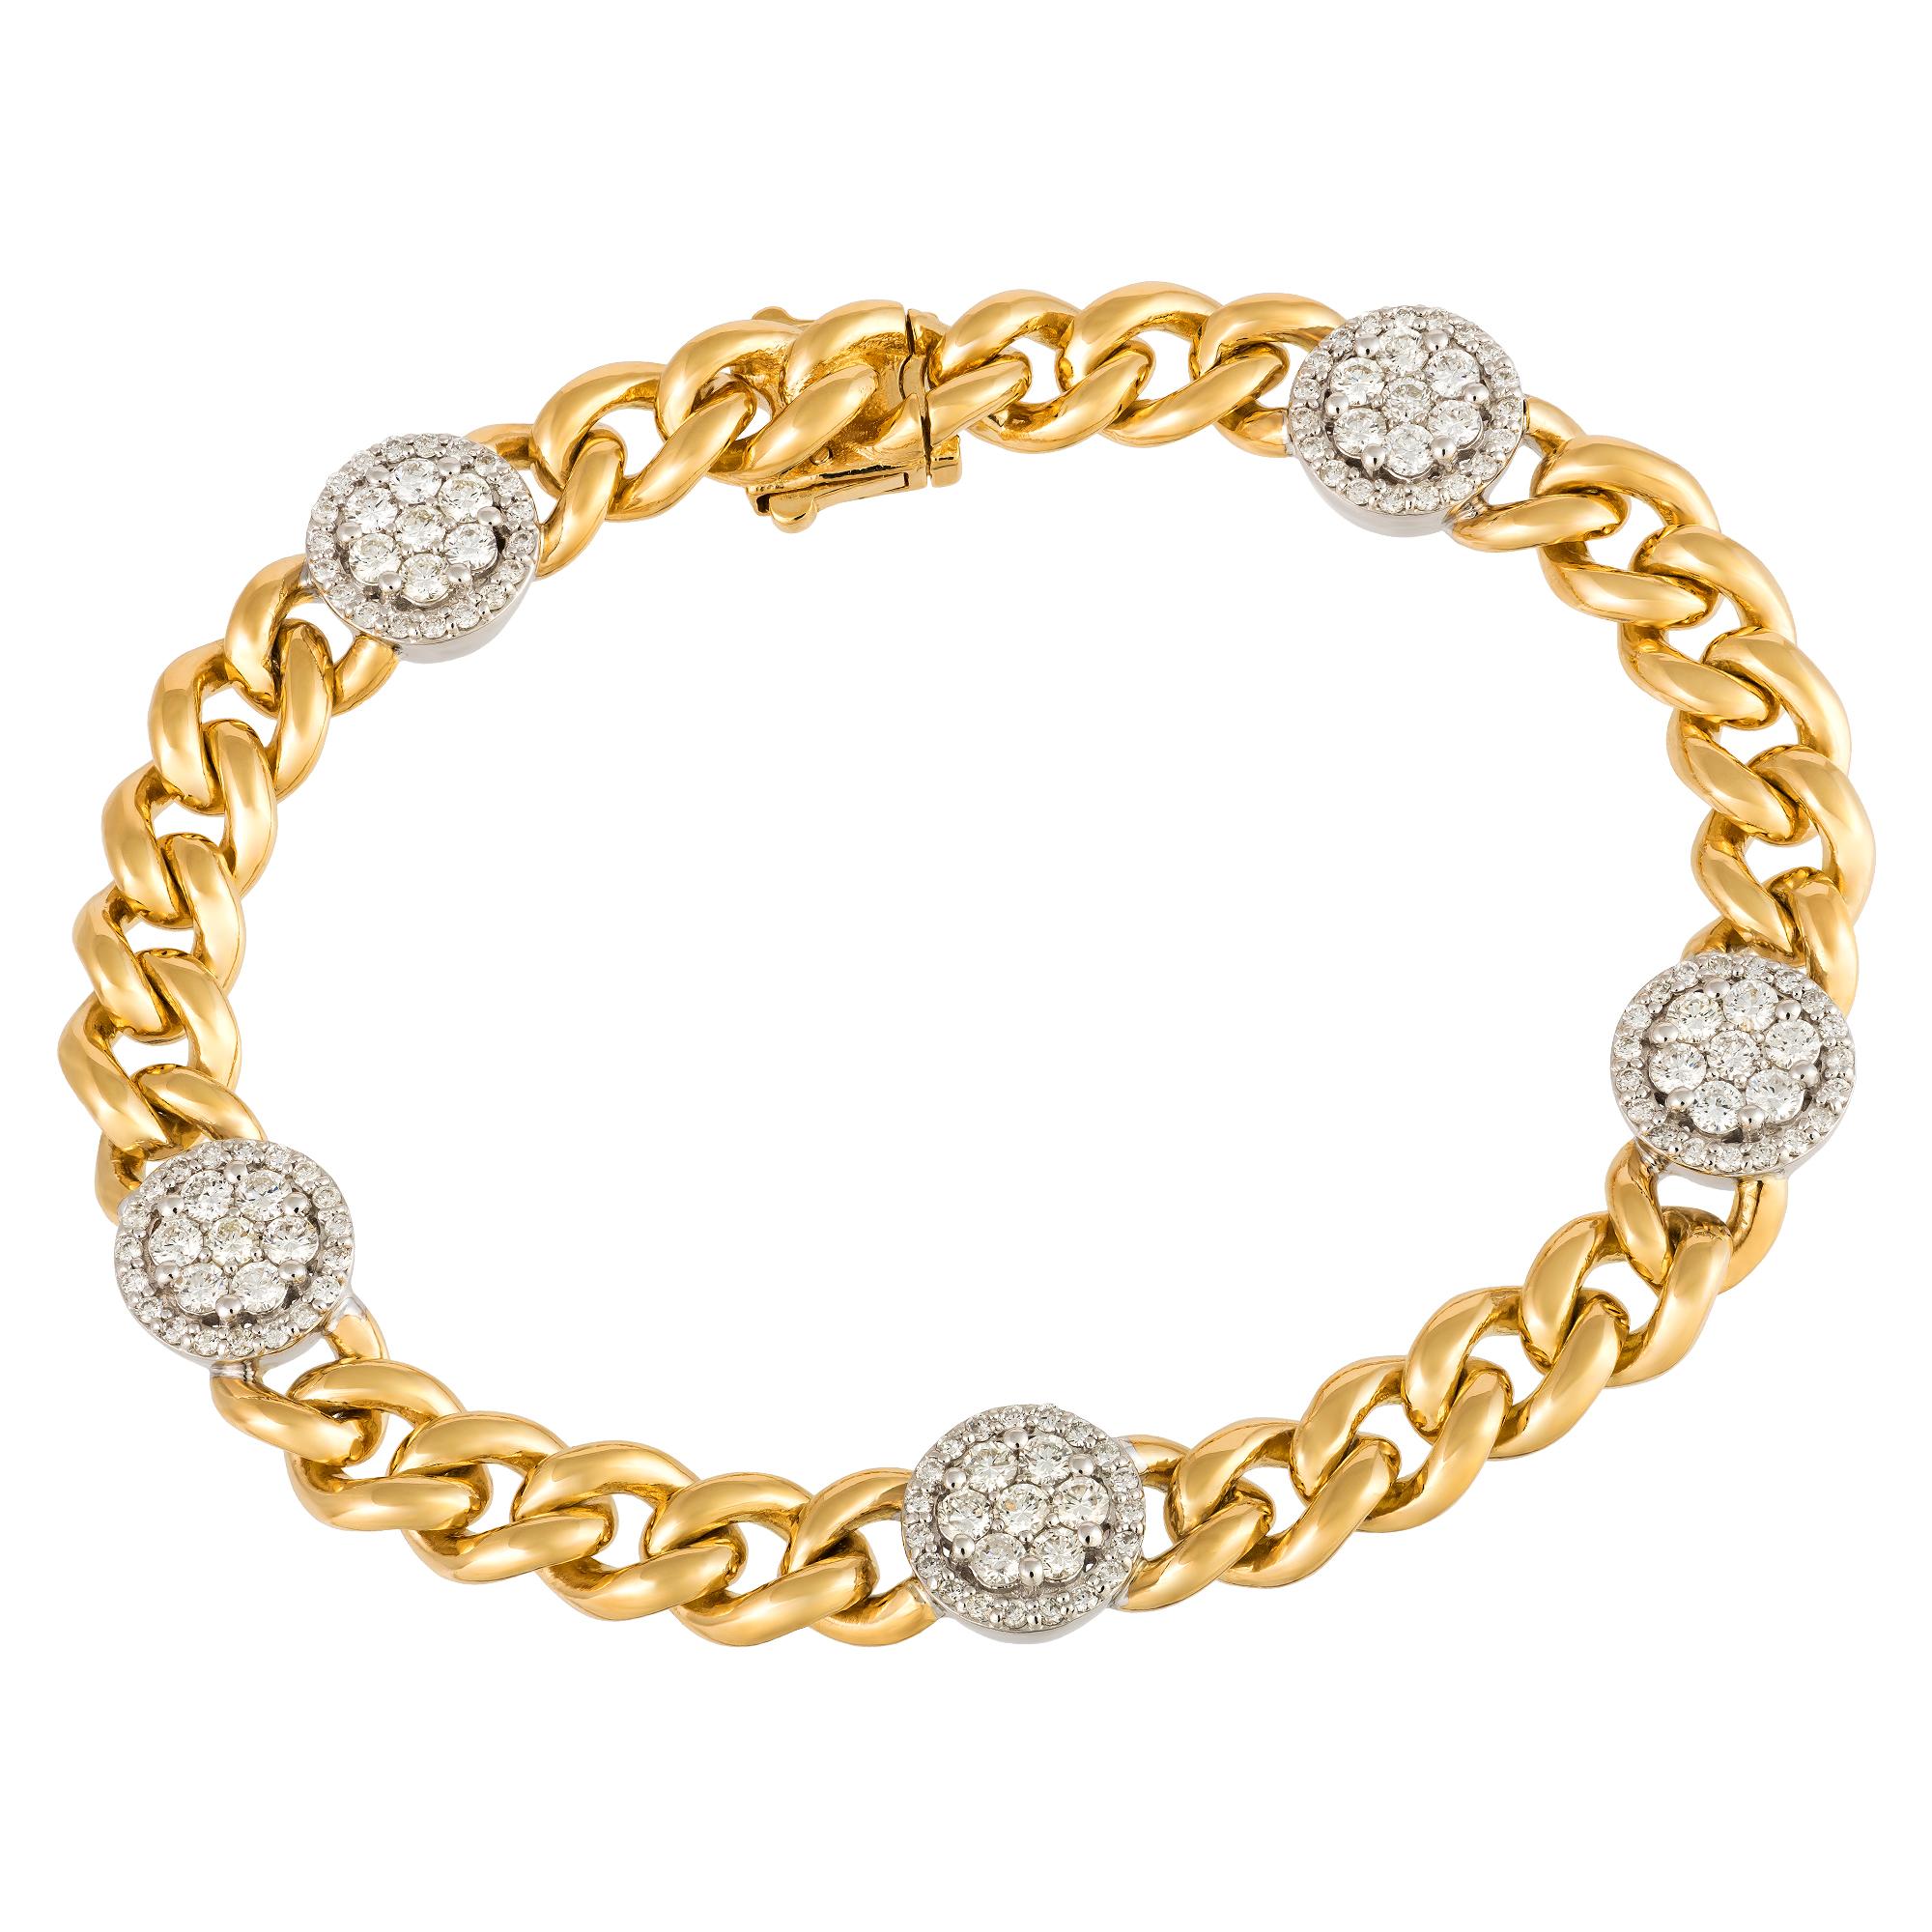 Modern Chain Unique White Yellow Gold 18K Bracelet Diamond for Her For Sale